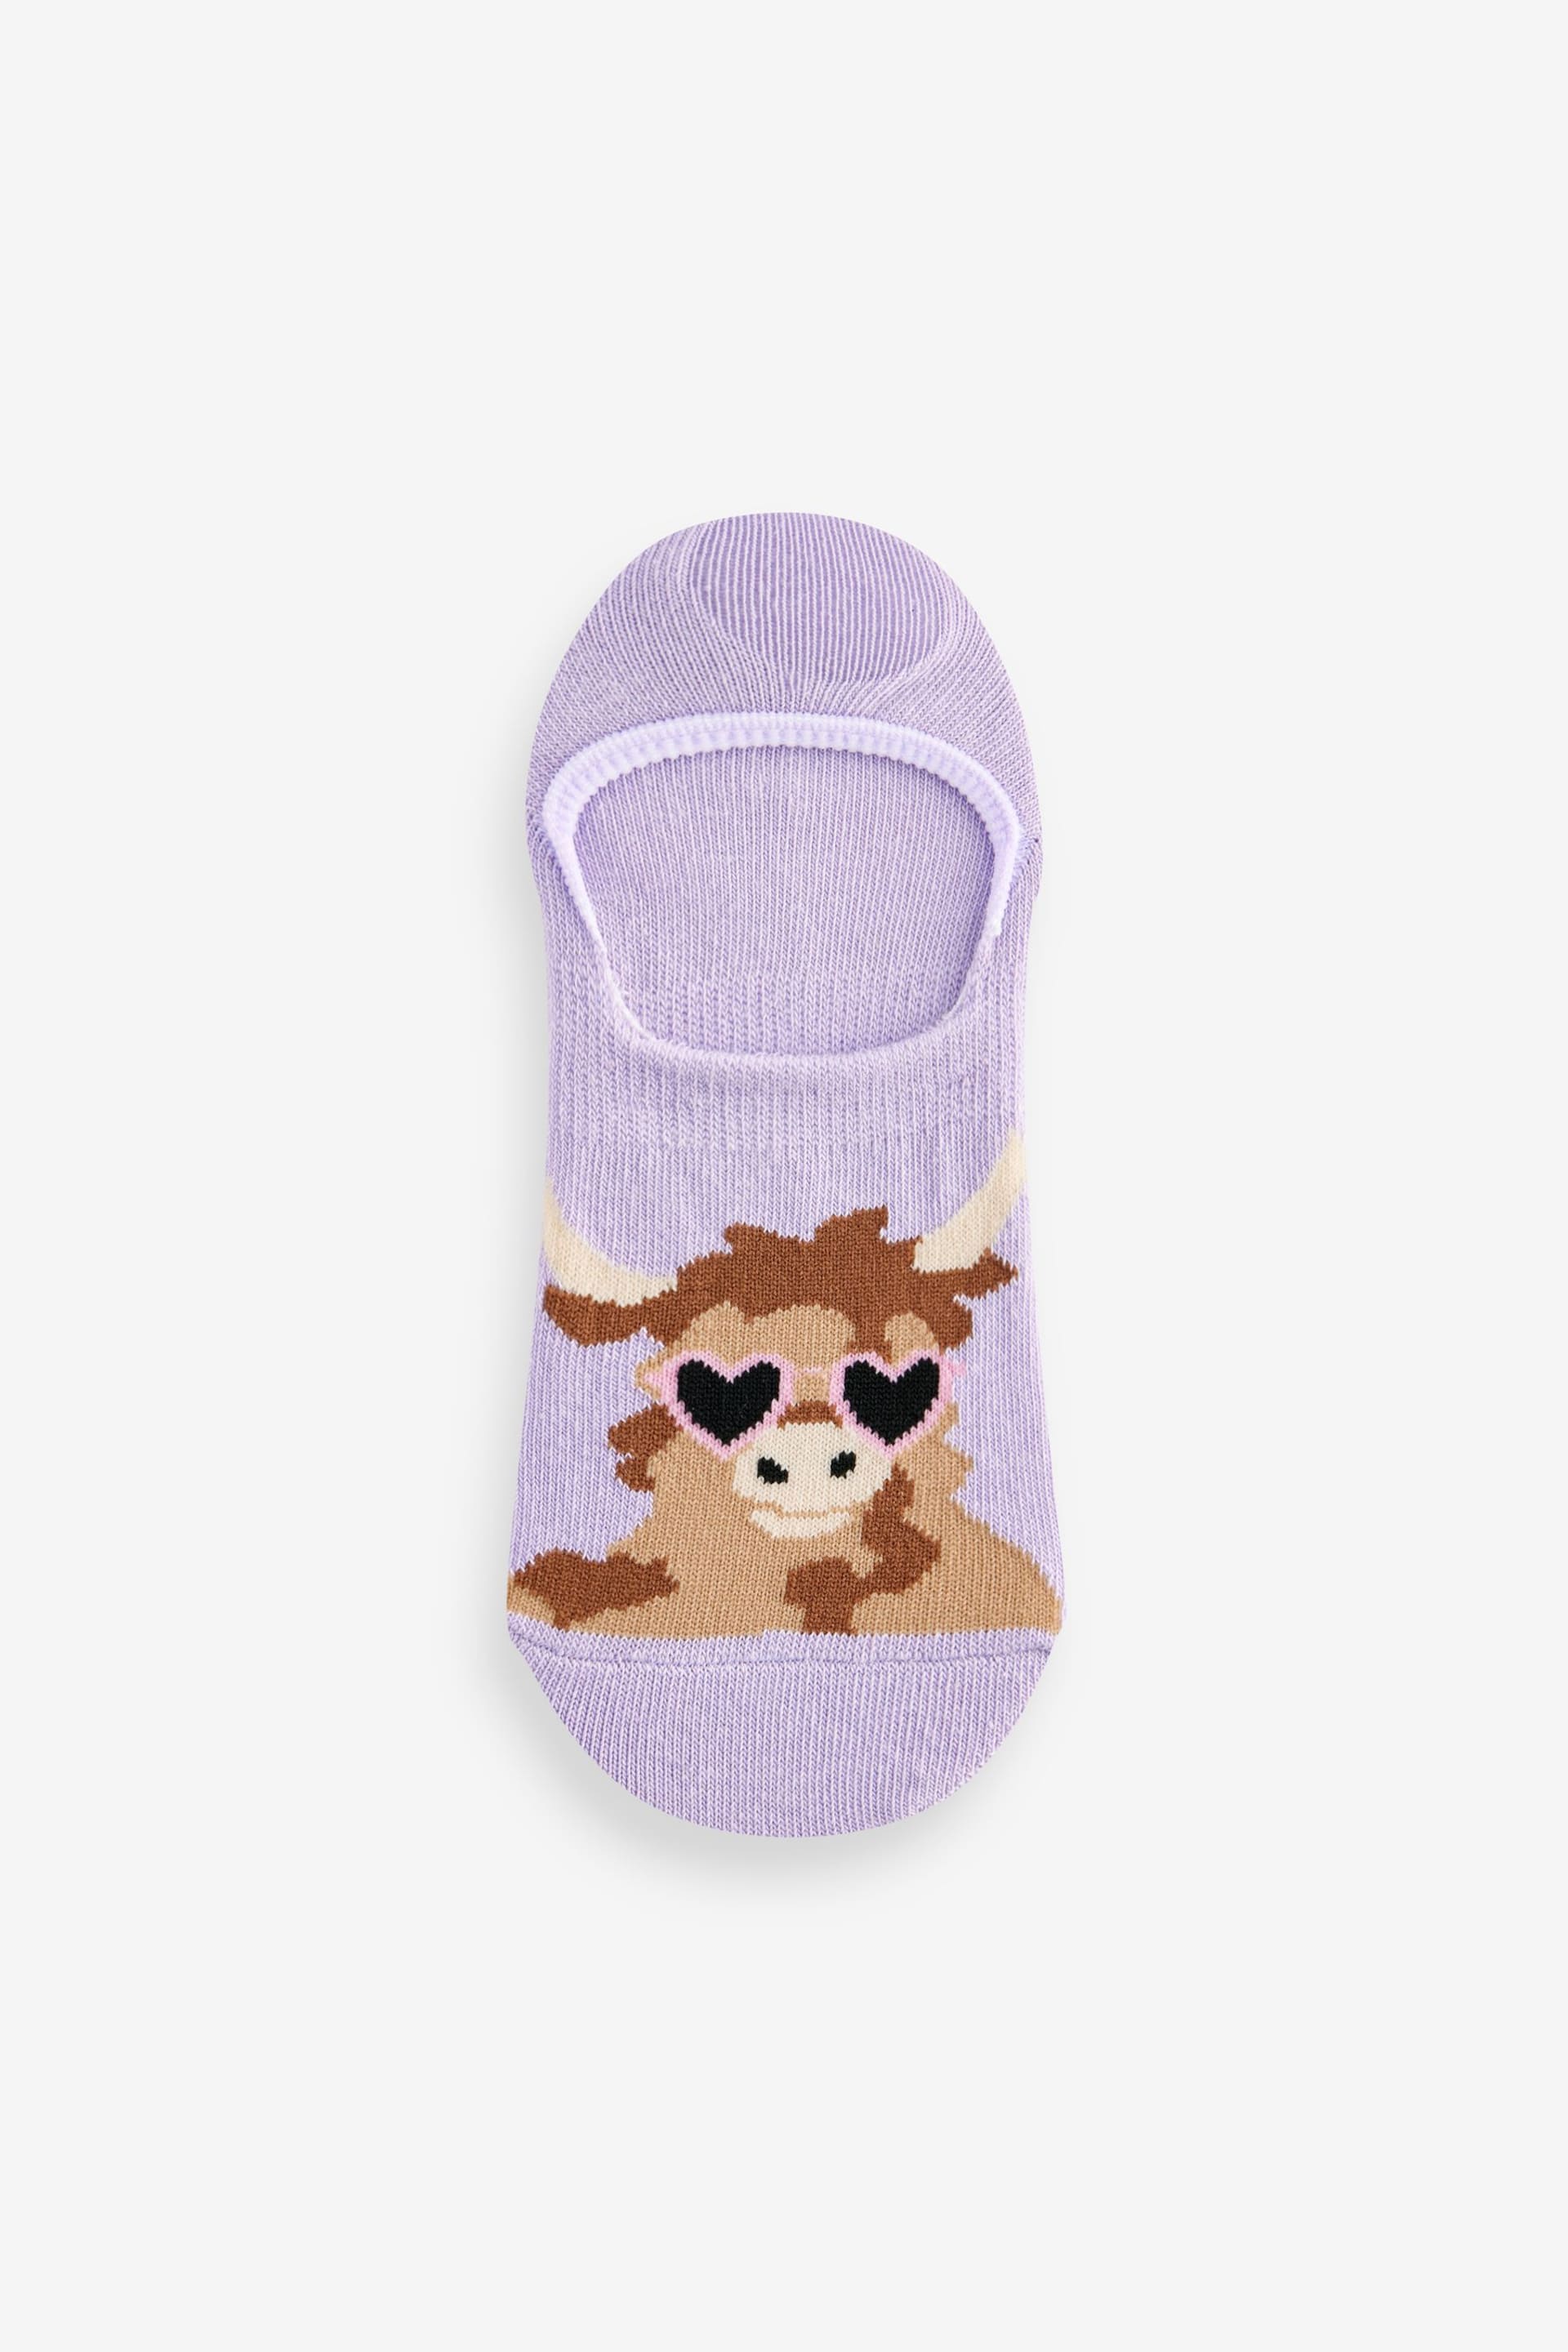 Multi Pastel Holiday Hamish The Highland Cow Invisible Trainer Socks 4 Pack - Image 4 of 5